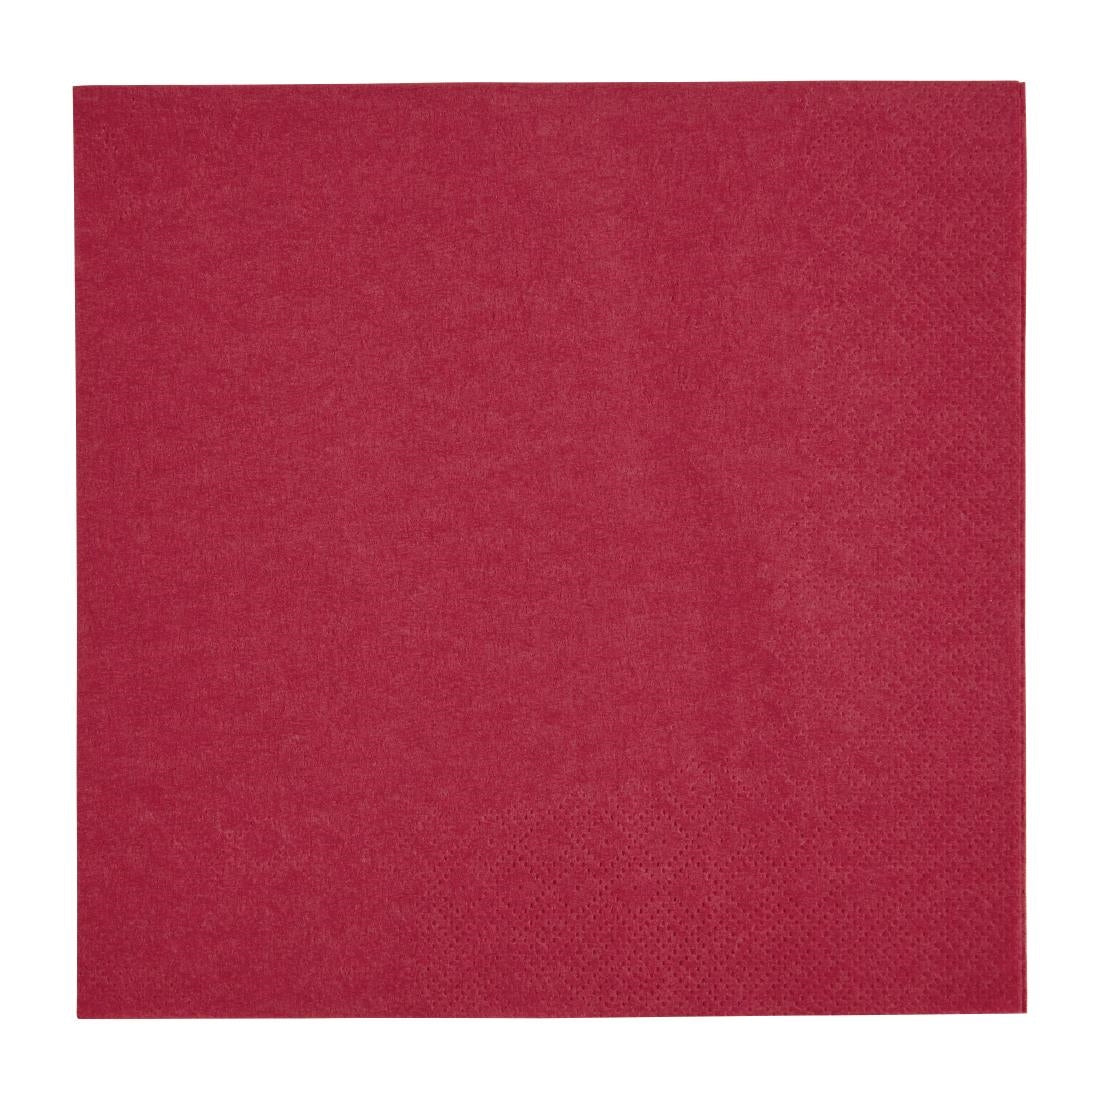 FE221 Fiesta Recyclable Lunch Napkin Bordeaux 33x33cm 2ply 1/4 Fold (Pack of 2000) JD Catering Equipment Solutions Ltd